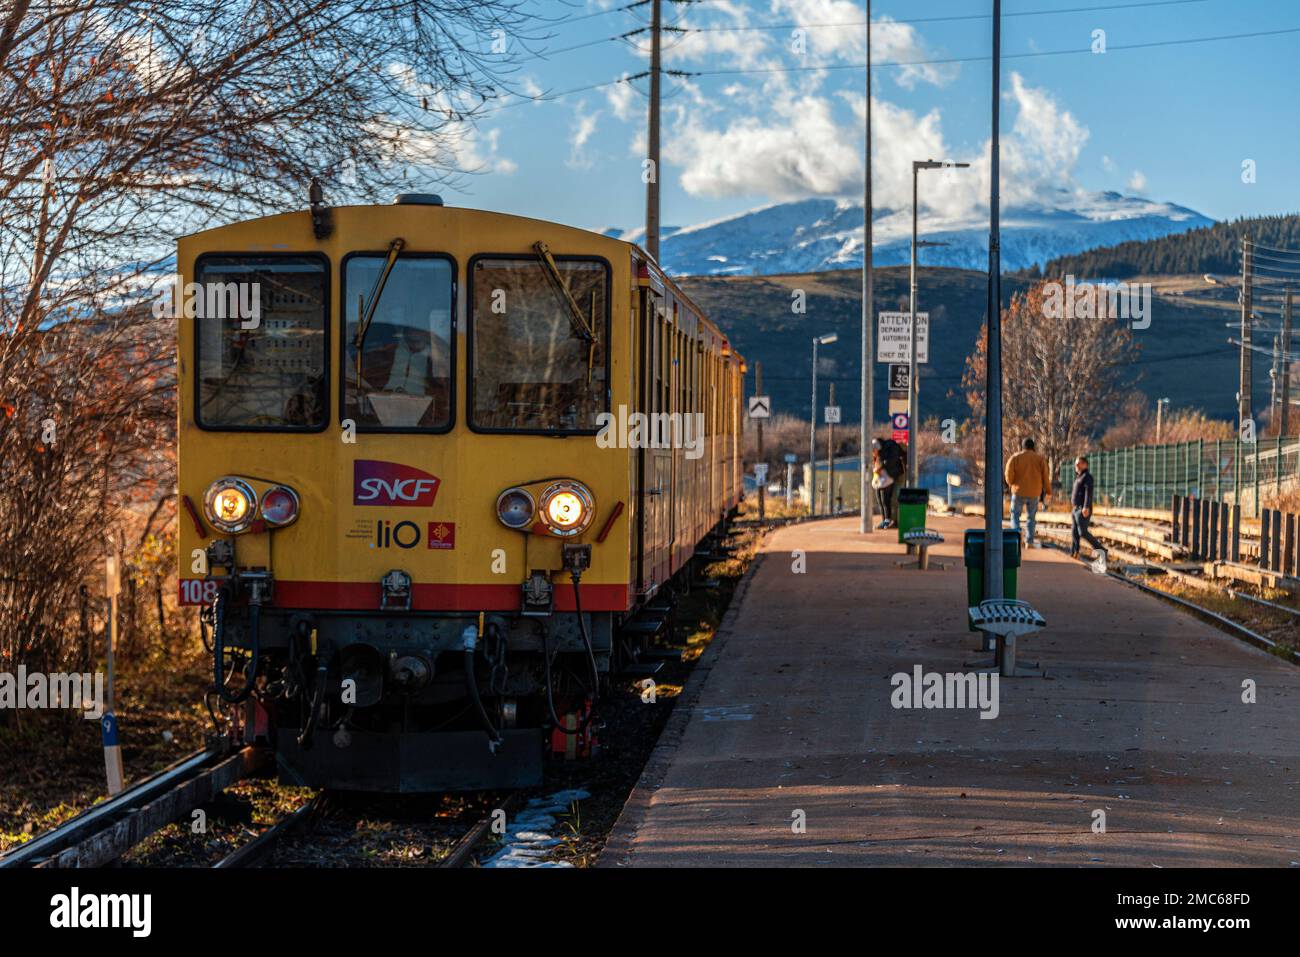 The Yellow train 'Le Train Jaune', here at Font Romeu, in the Pyrenees Orientales region of southern France. Stock Photo